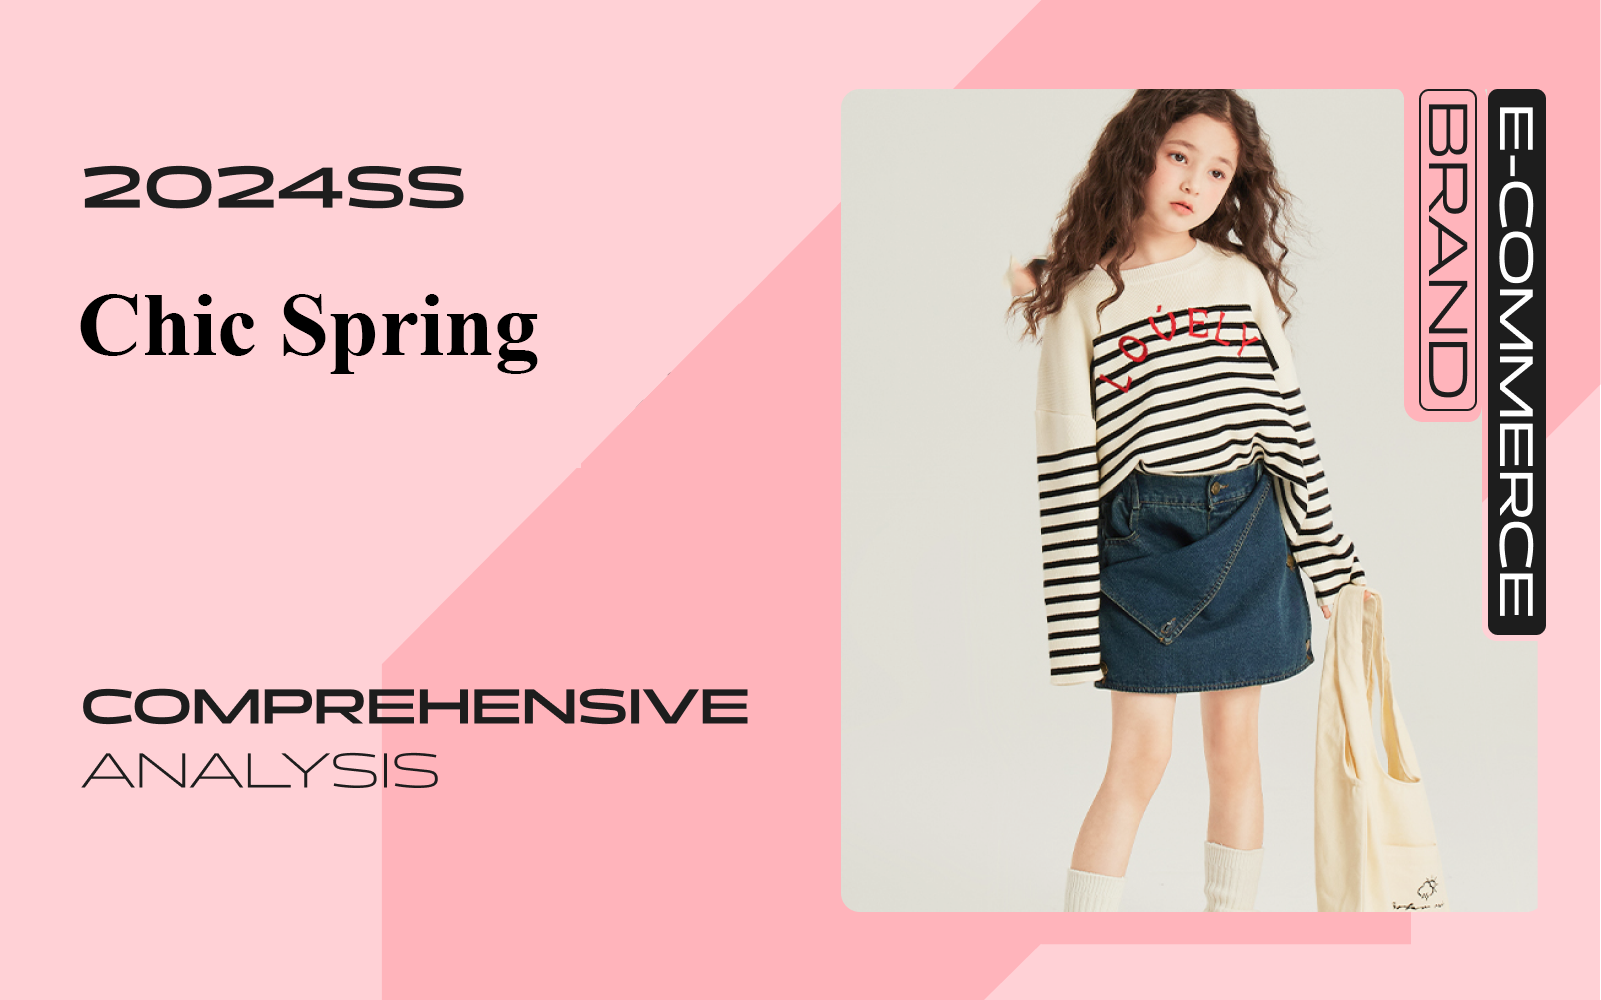 Chic Spring -- The Comprehensive Analysis of E-Commerce Girlswear Brand